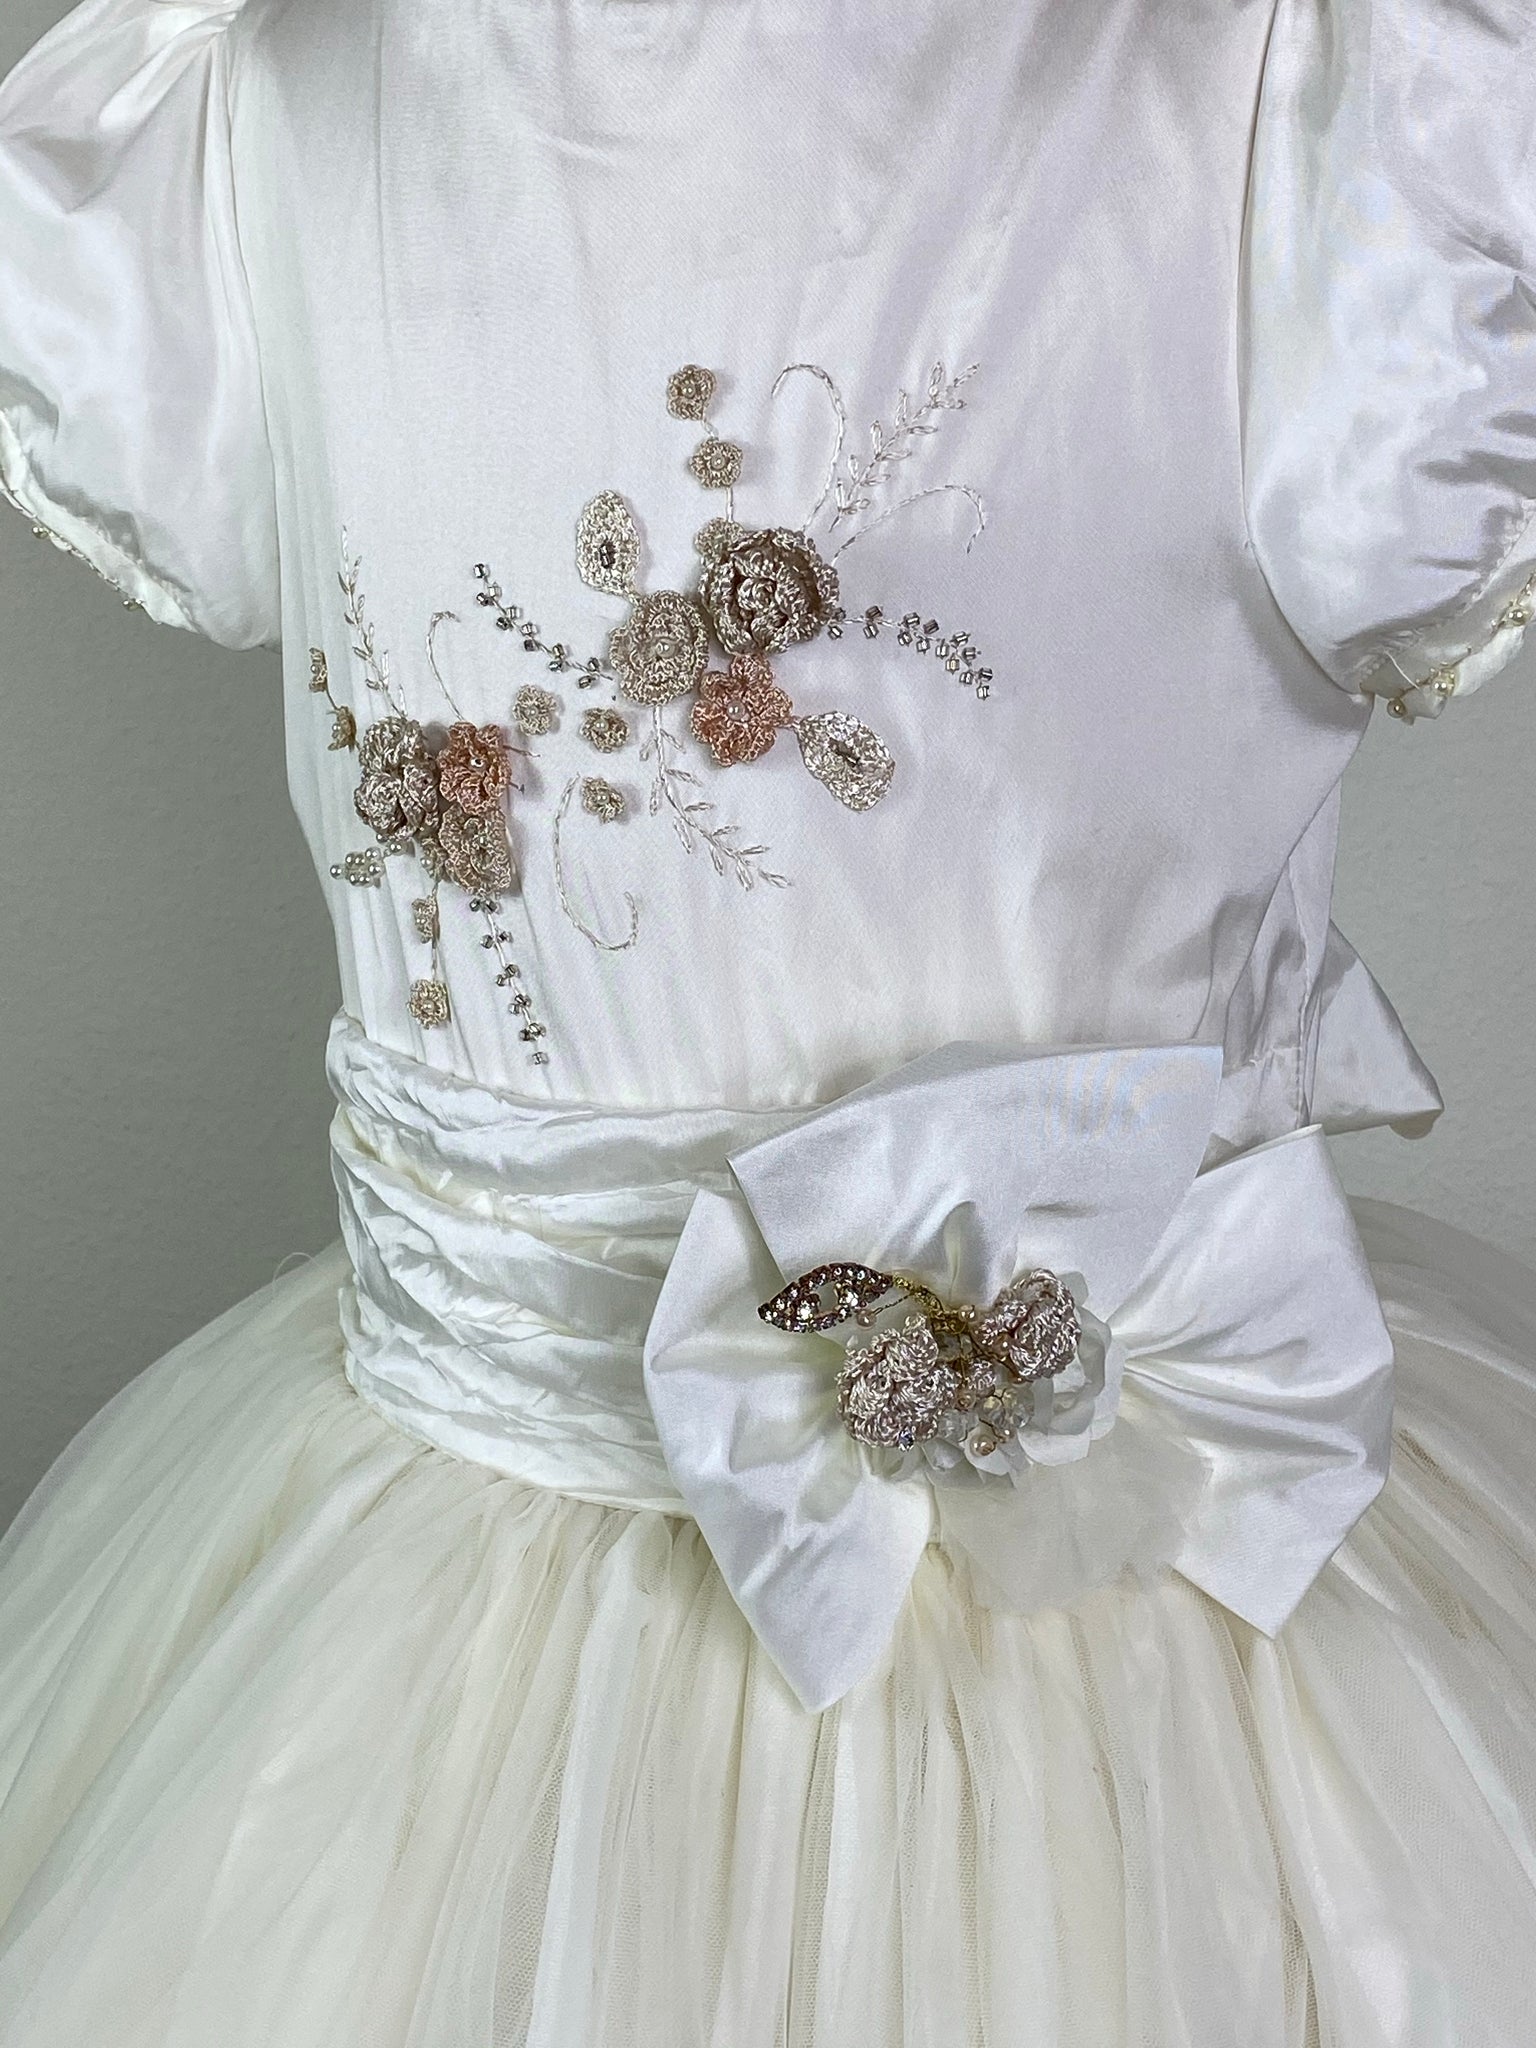 Ivory, size 10 Puffed short sleeve Hand stitched satin and pearl trim along sleeve and neckline Neutral colored embroidered flower applique along ivory satin bodice Large bow on ivory cummerbund with rhinestone and floral detailing Tulle skirt with embroidered appliques scattered Ivory satin covered button closure Ivory ribbon for large bow